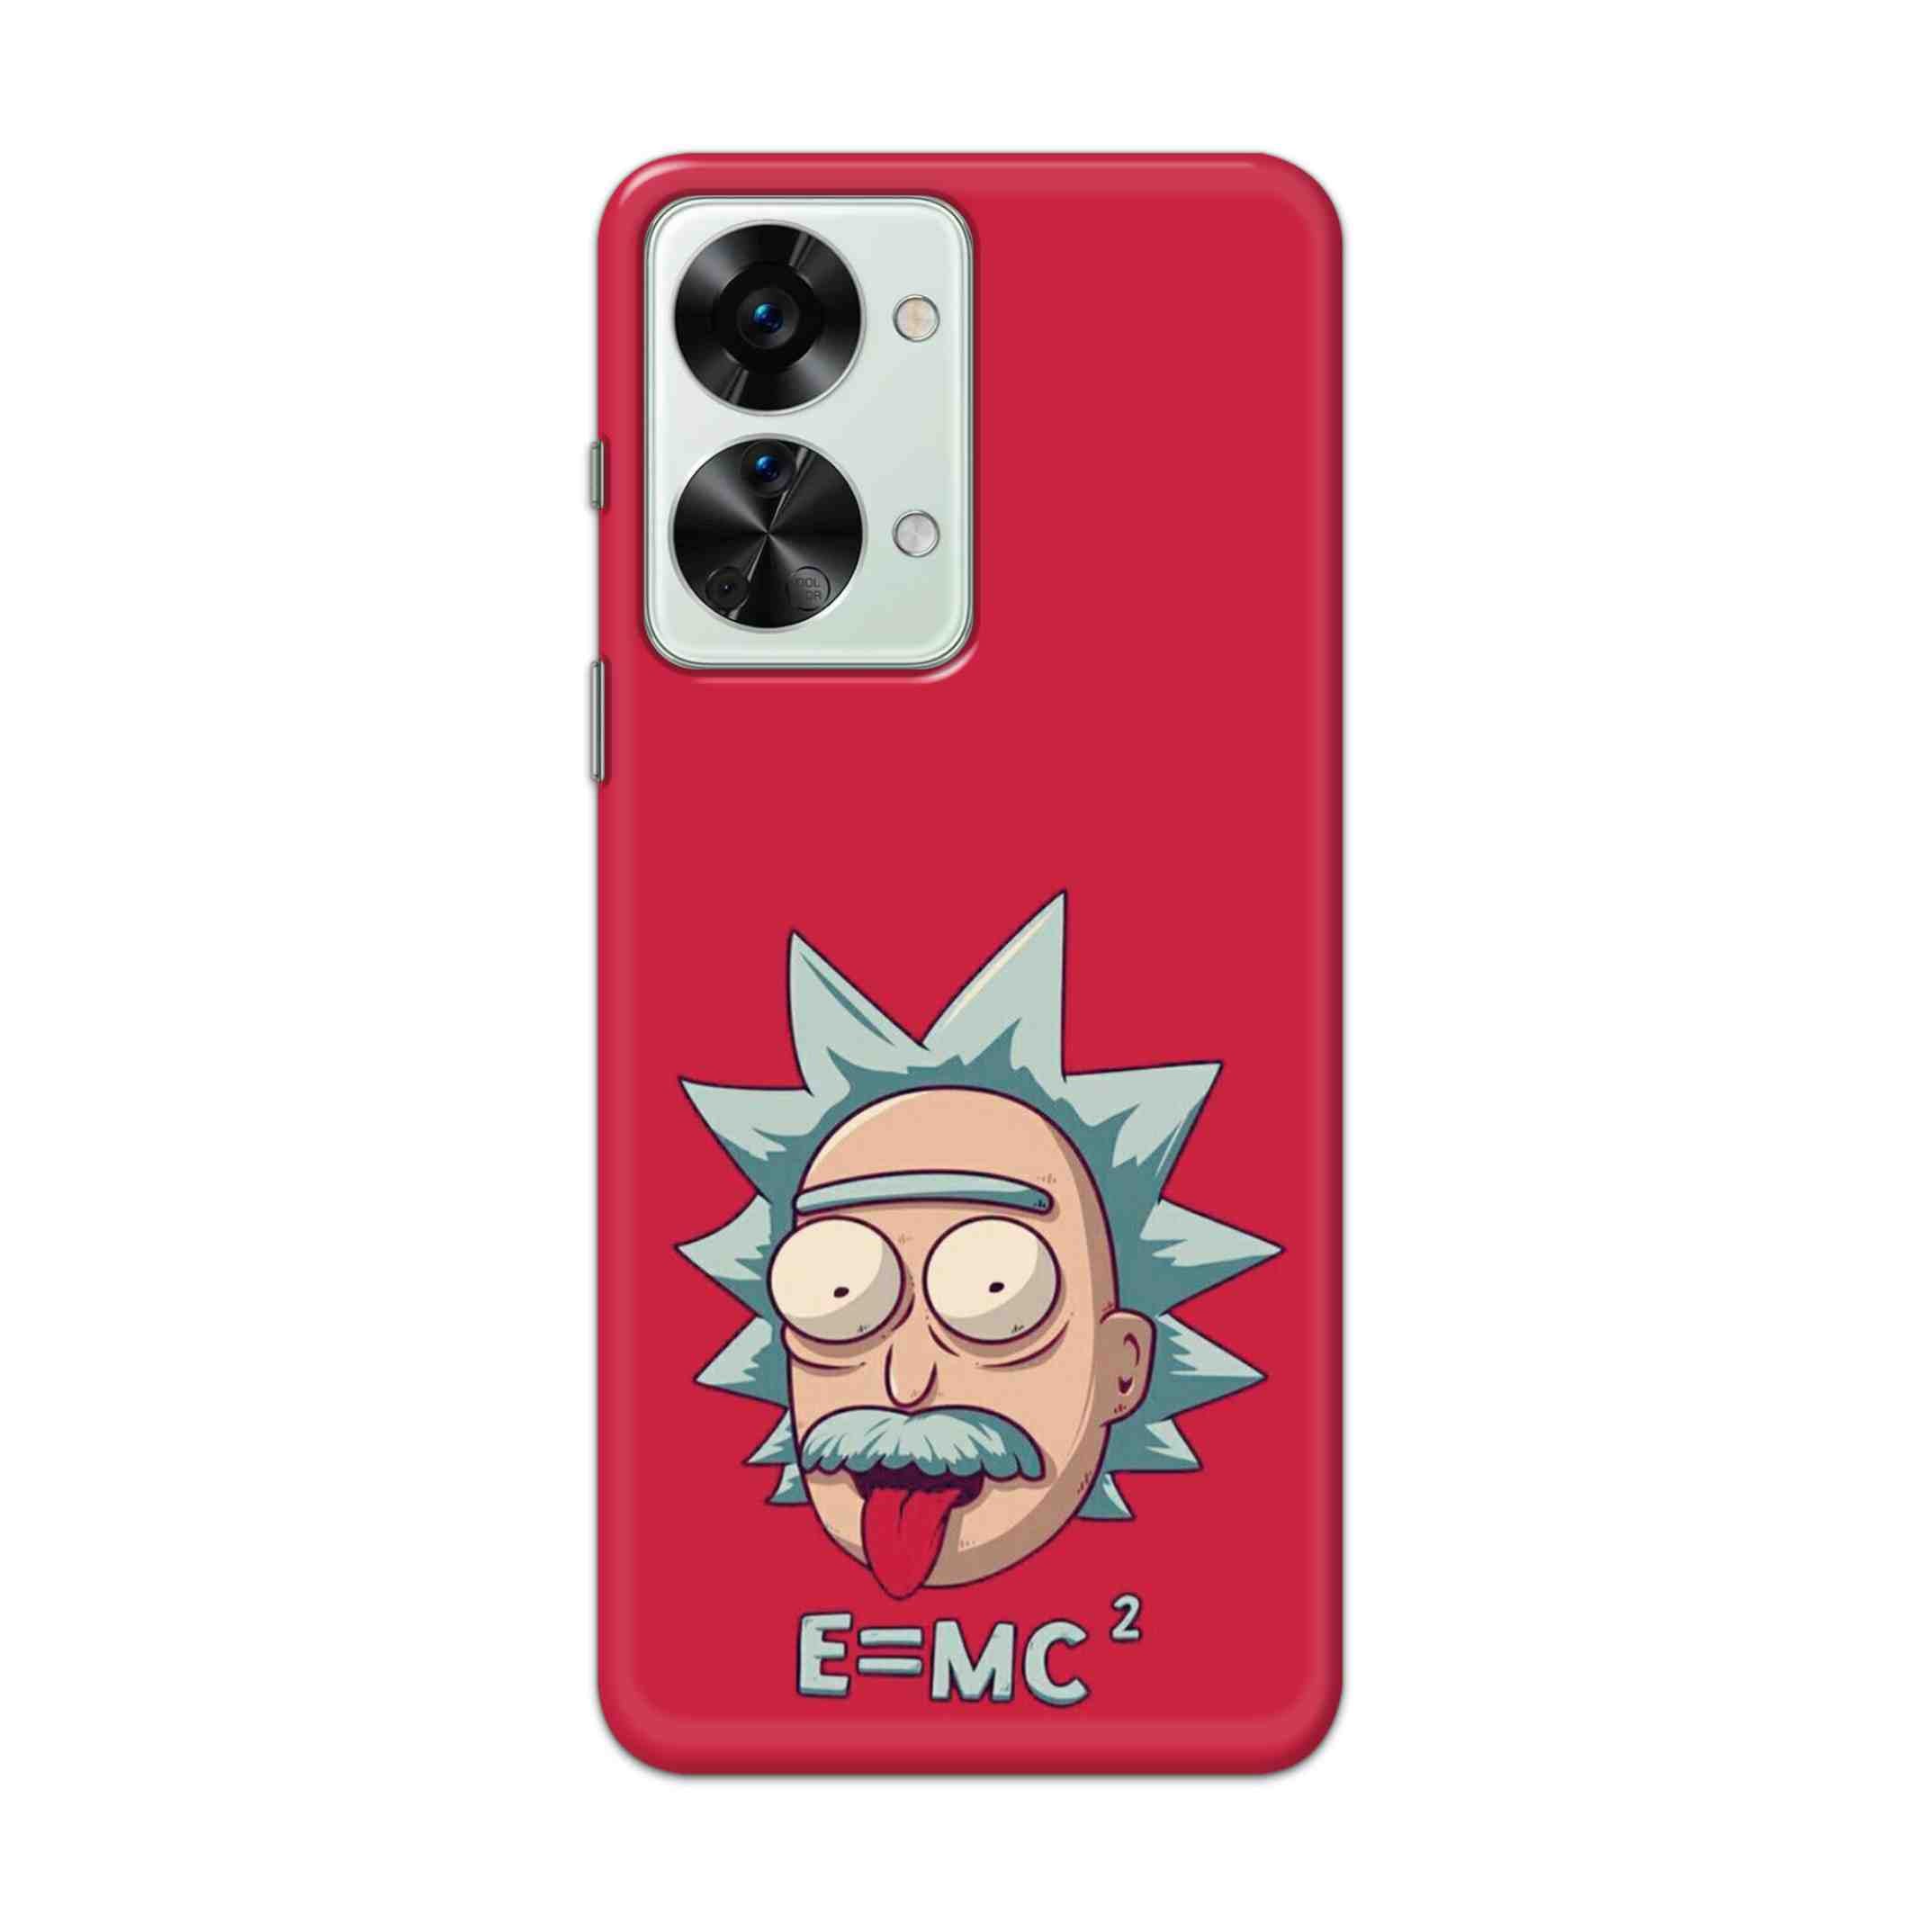 Buy E=Mc Hard Back Mobile Phone Case Cover For OnePlus Nord 2T 5G Online